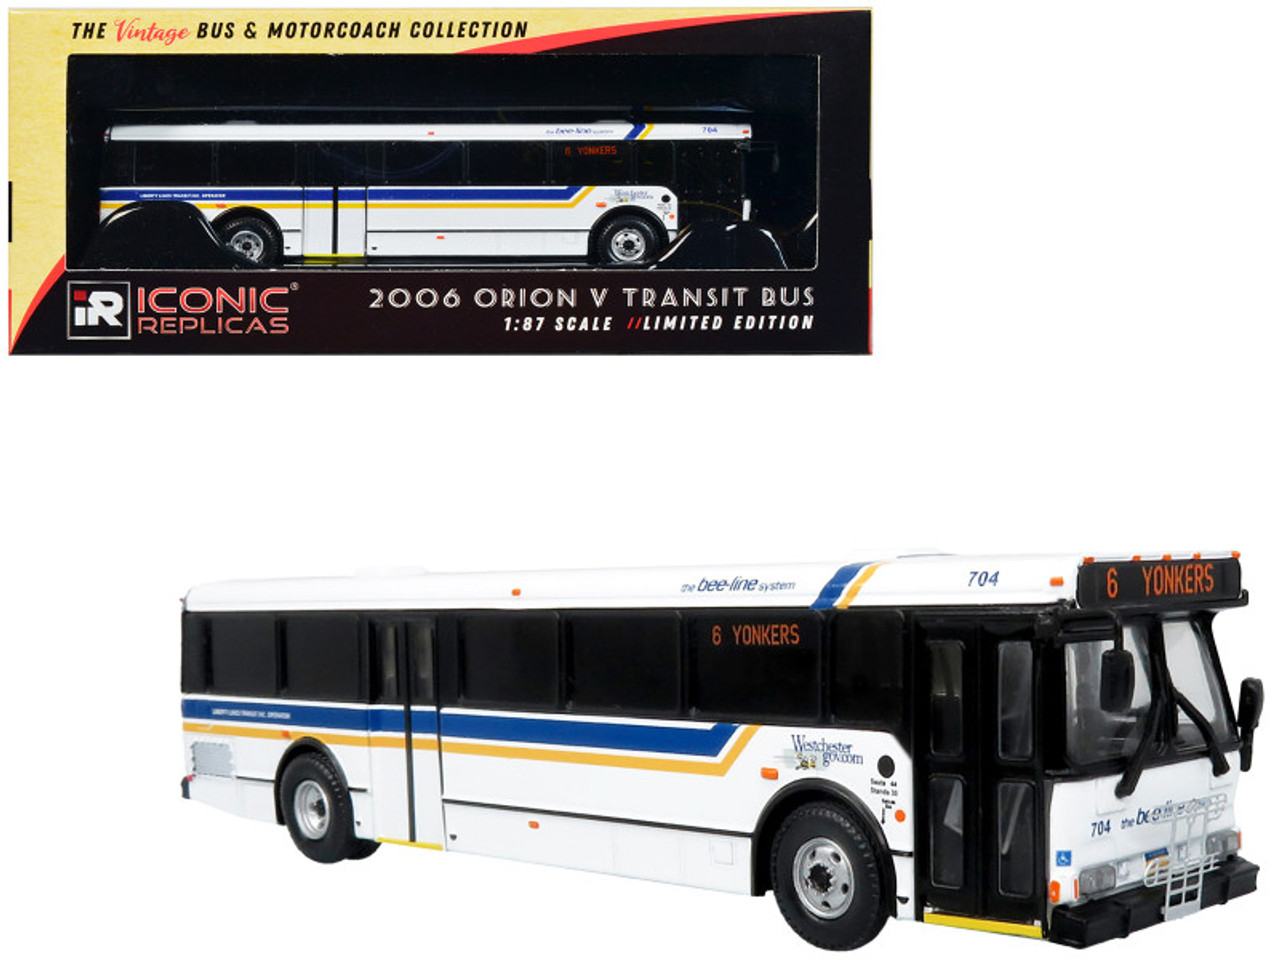 2006 Orion V Transit Bus Westchester, NY Bee-Line "6 Yonkers" Limited Edition "The Vintage Bus and Motorcoach Collection" 1/87 (HO) Diecast Model by Iconic Replicas